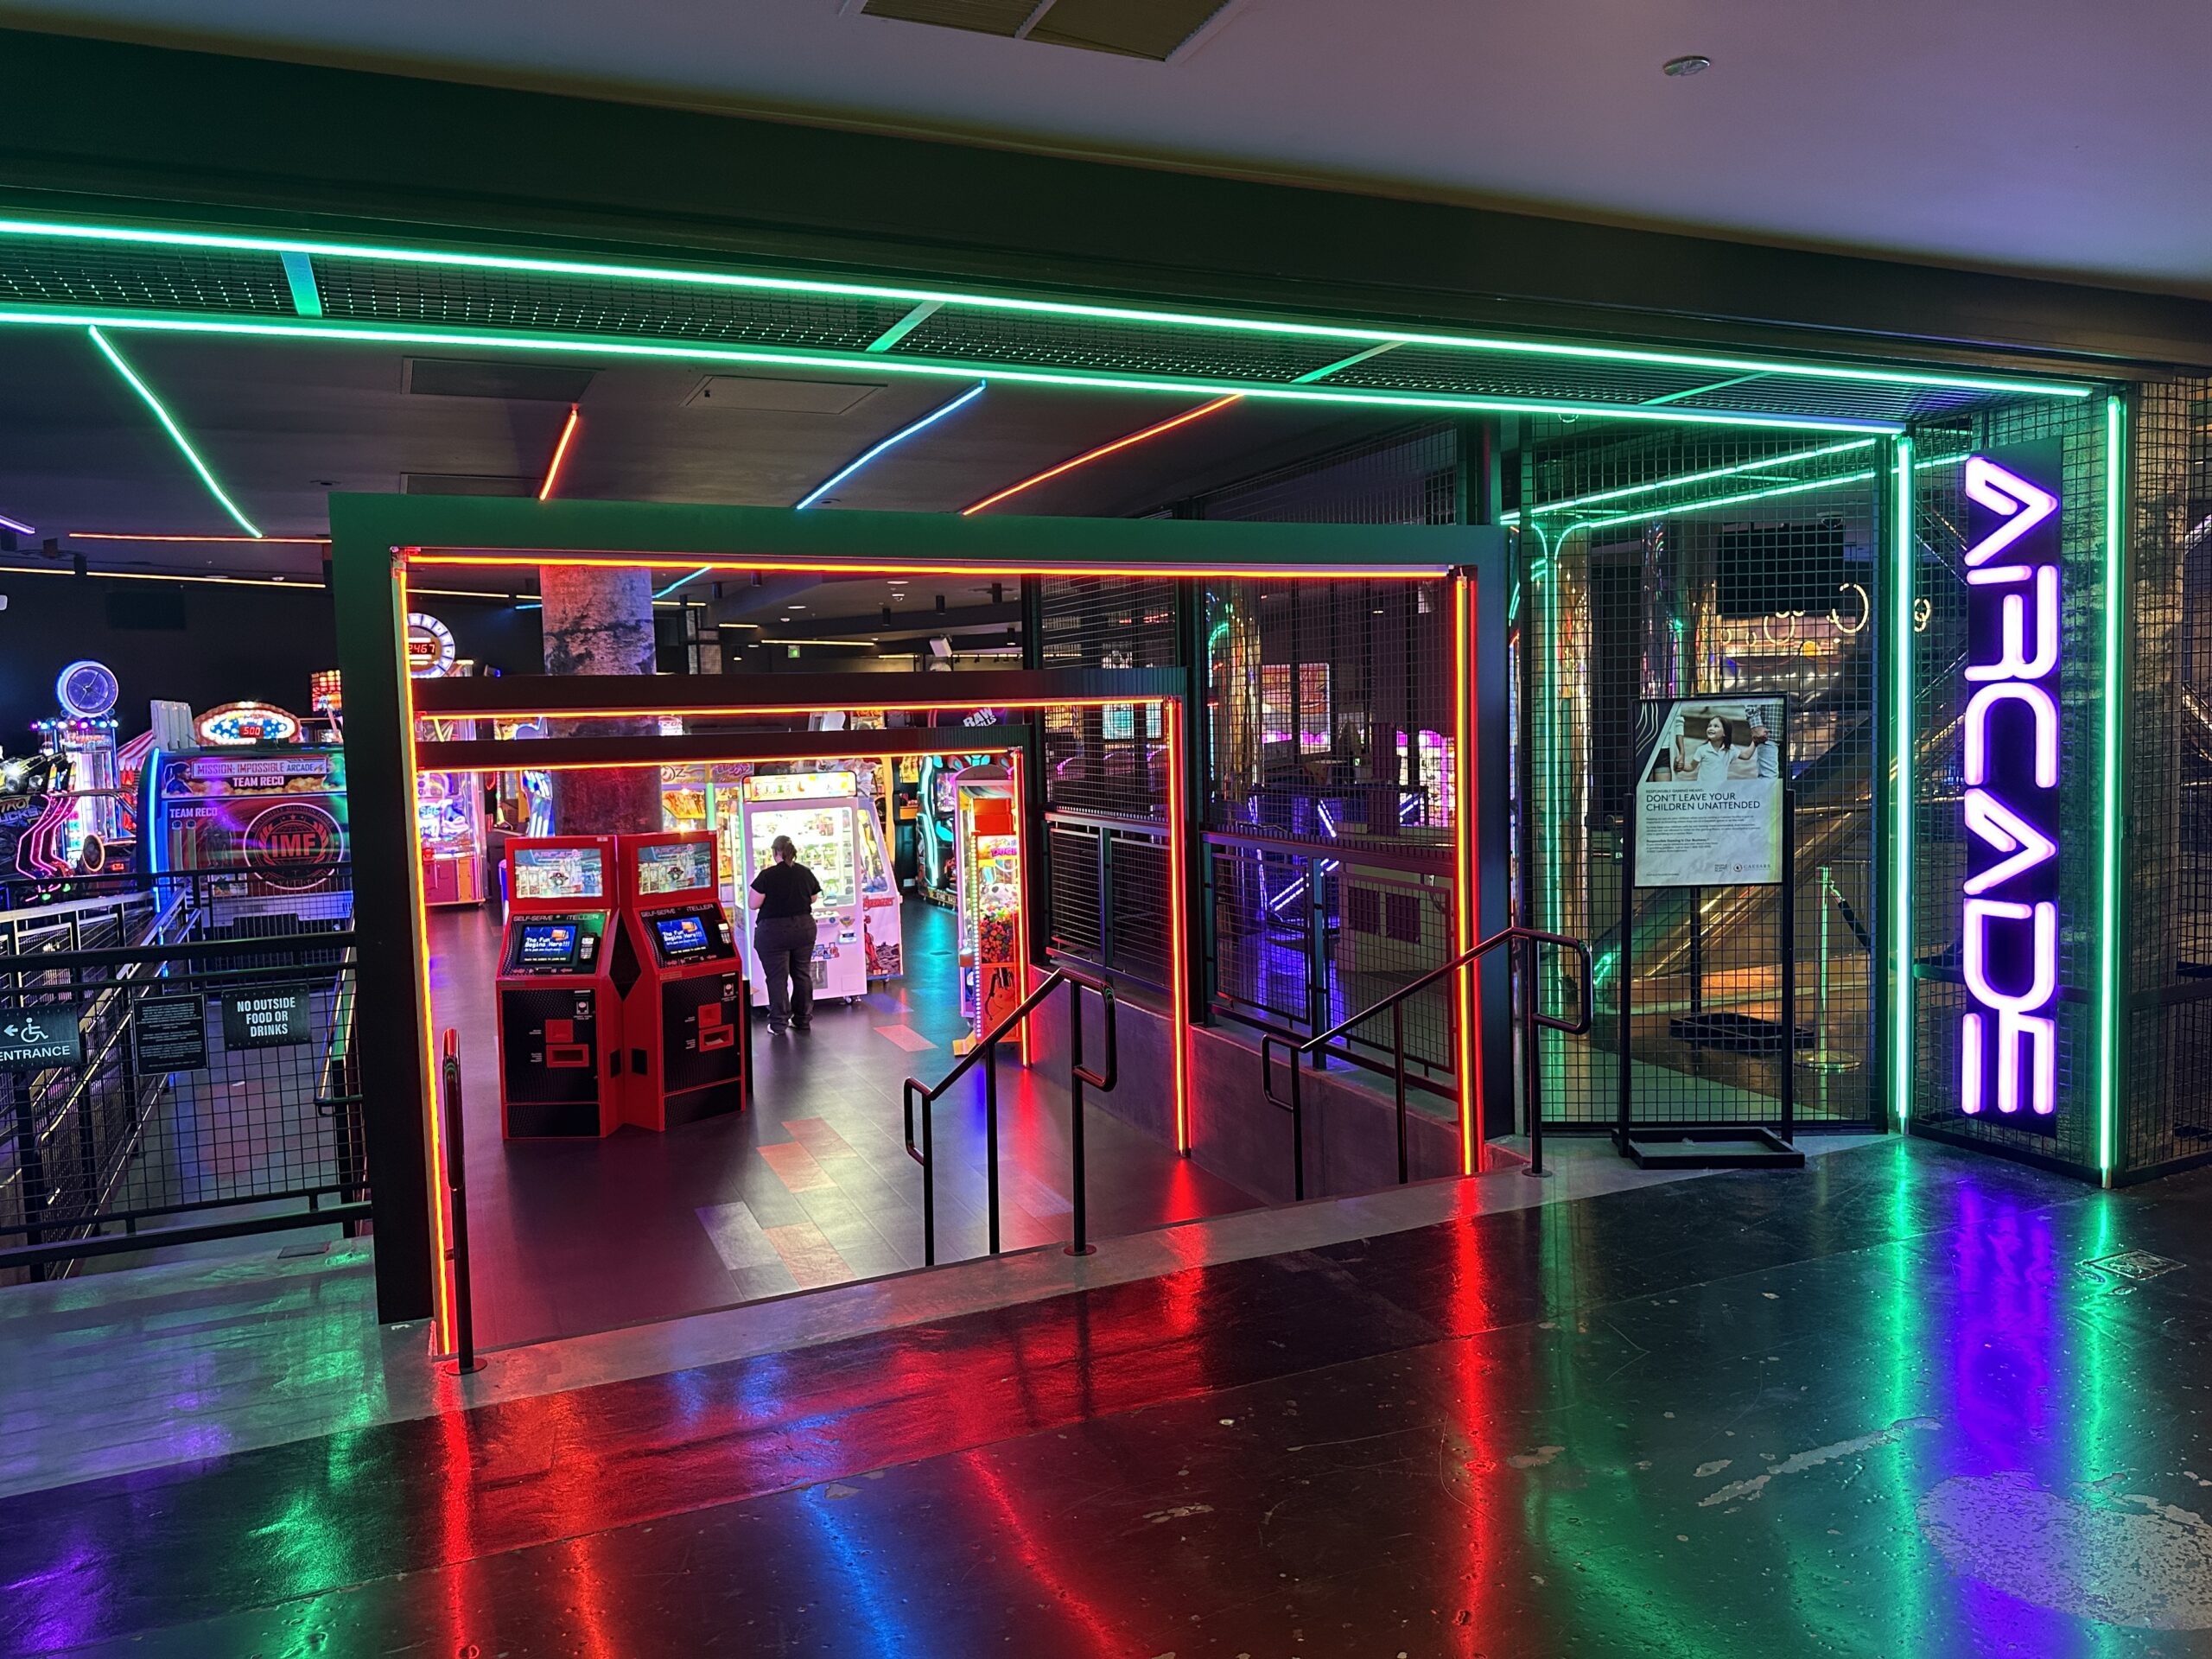 Entrance to the ARCADE, which is surrounded in green, purple, and red neon lights.